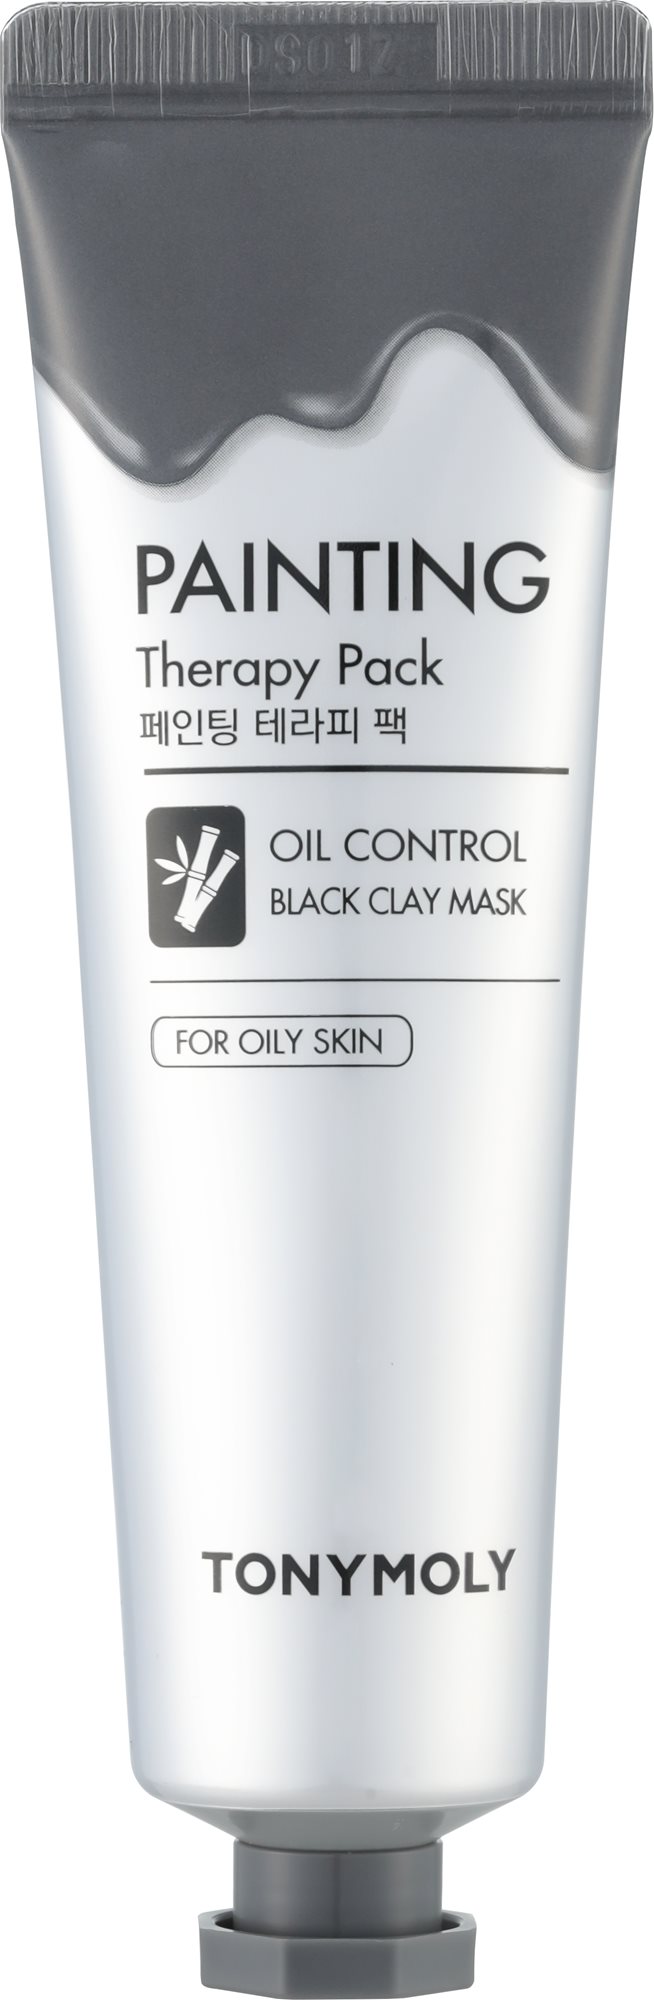 TONYMOLY Painting Therapy Pack Oil Control 30 g